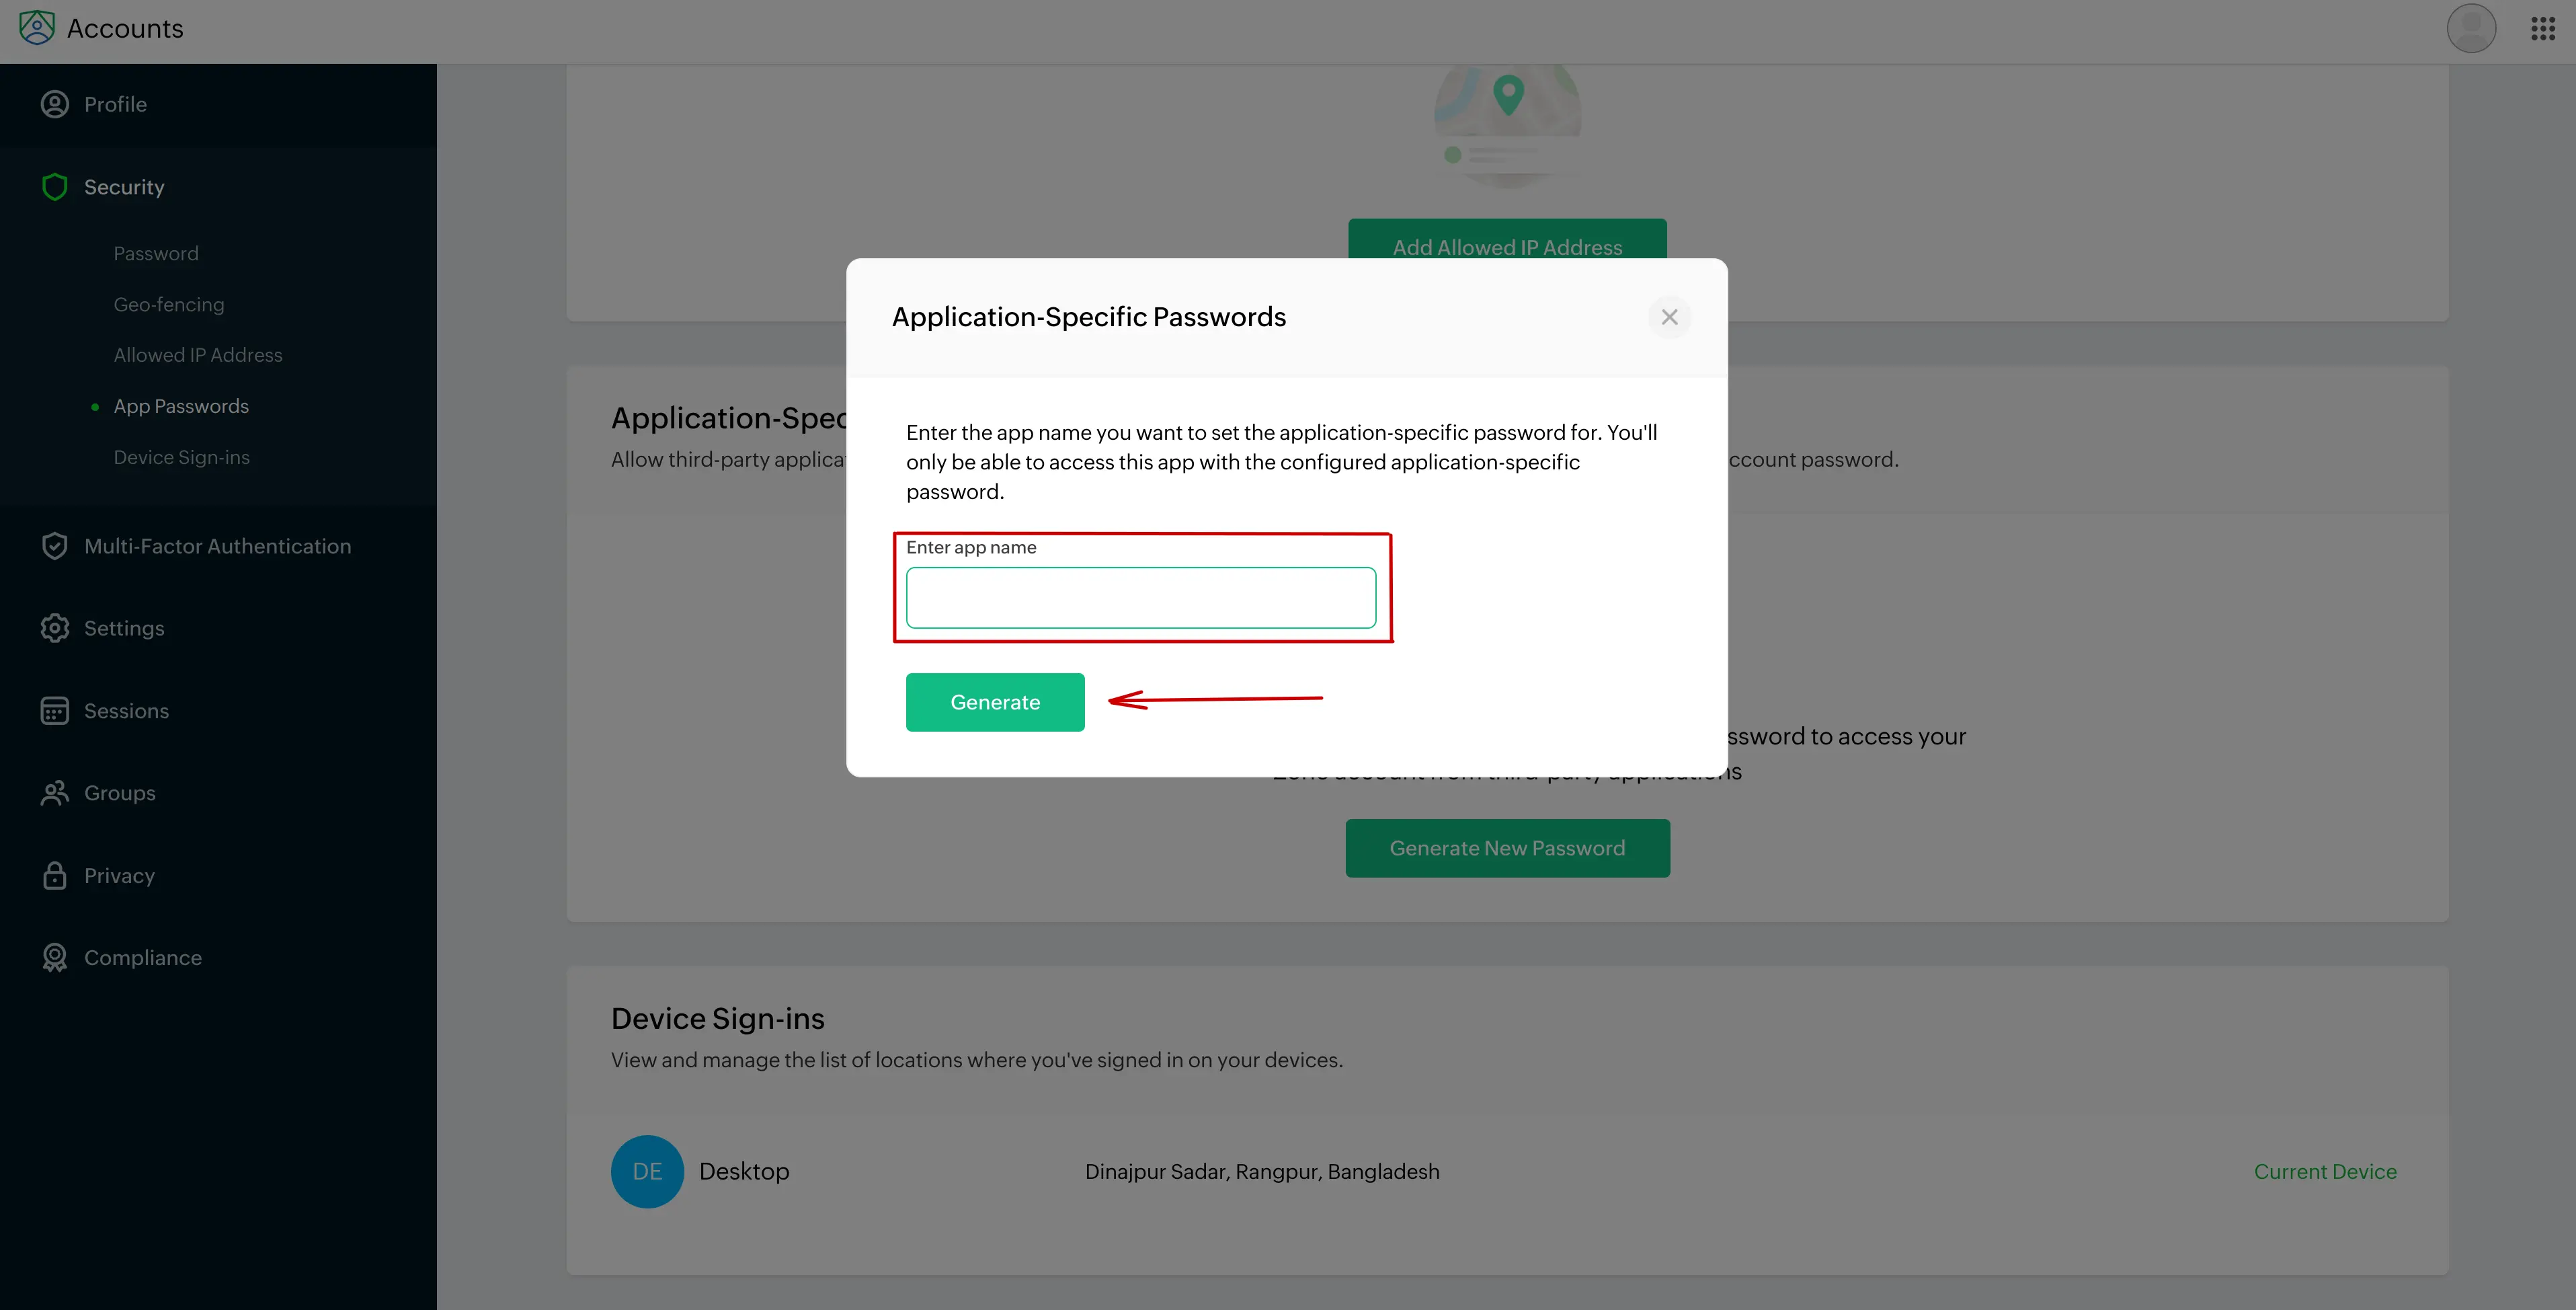 zohomail application name form for gerate app specific password